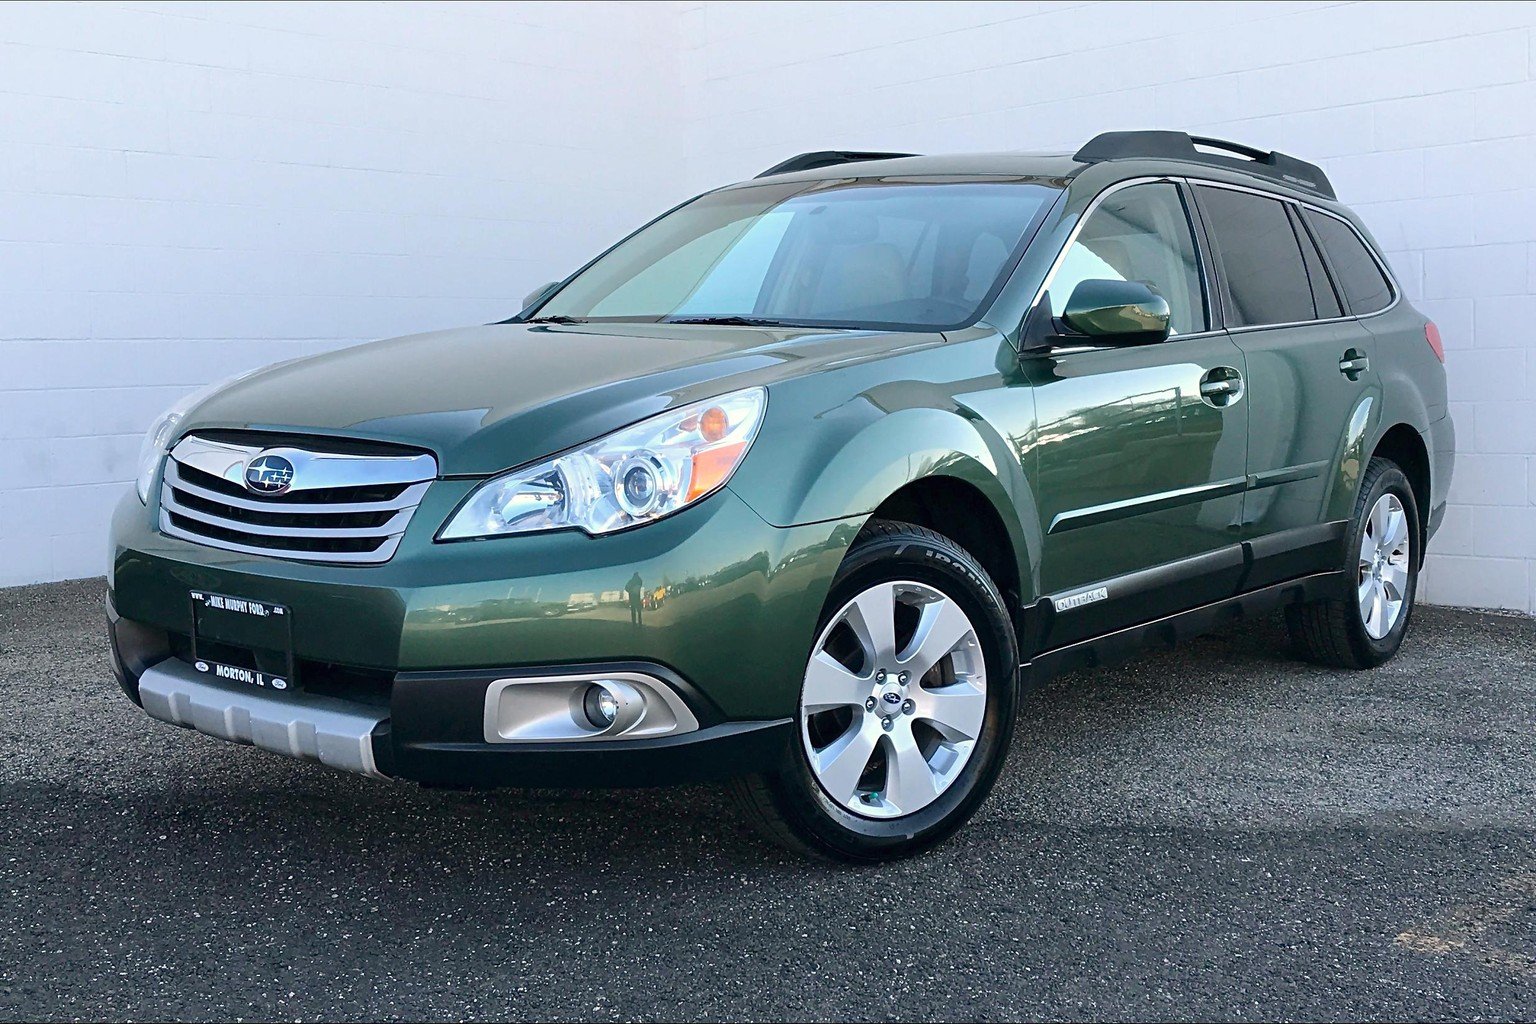 PreOwned 2012 Subaru Outback 2.5i 4D Sport Utility in